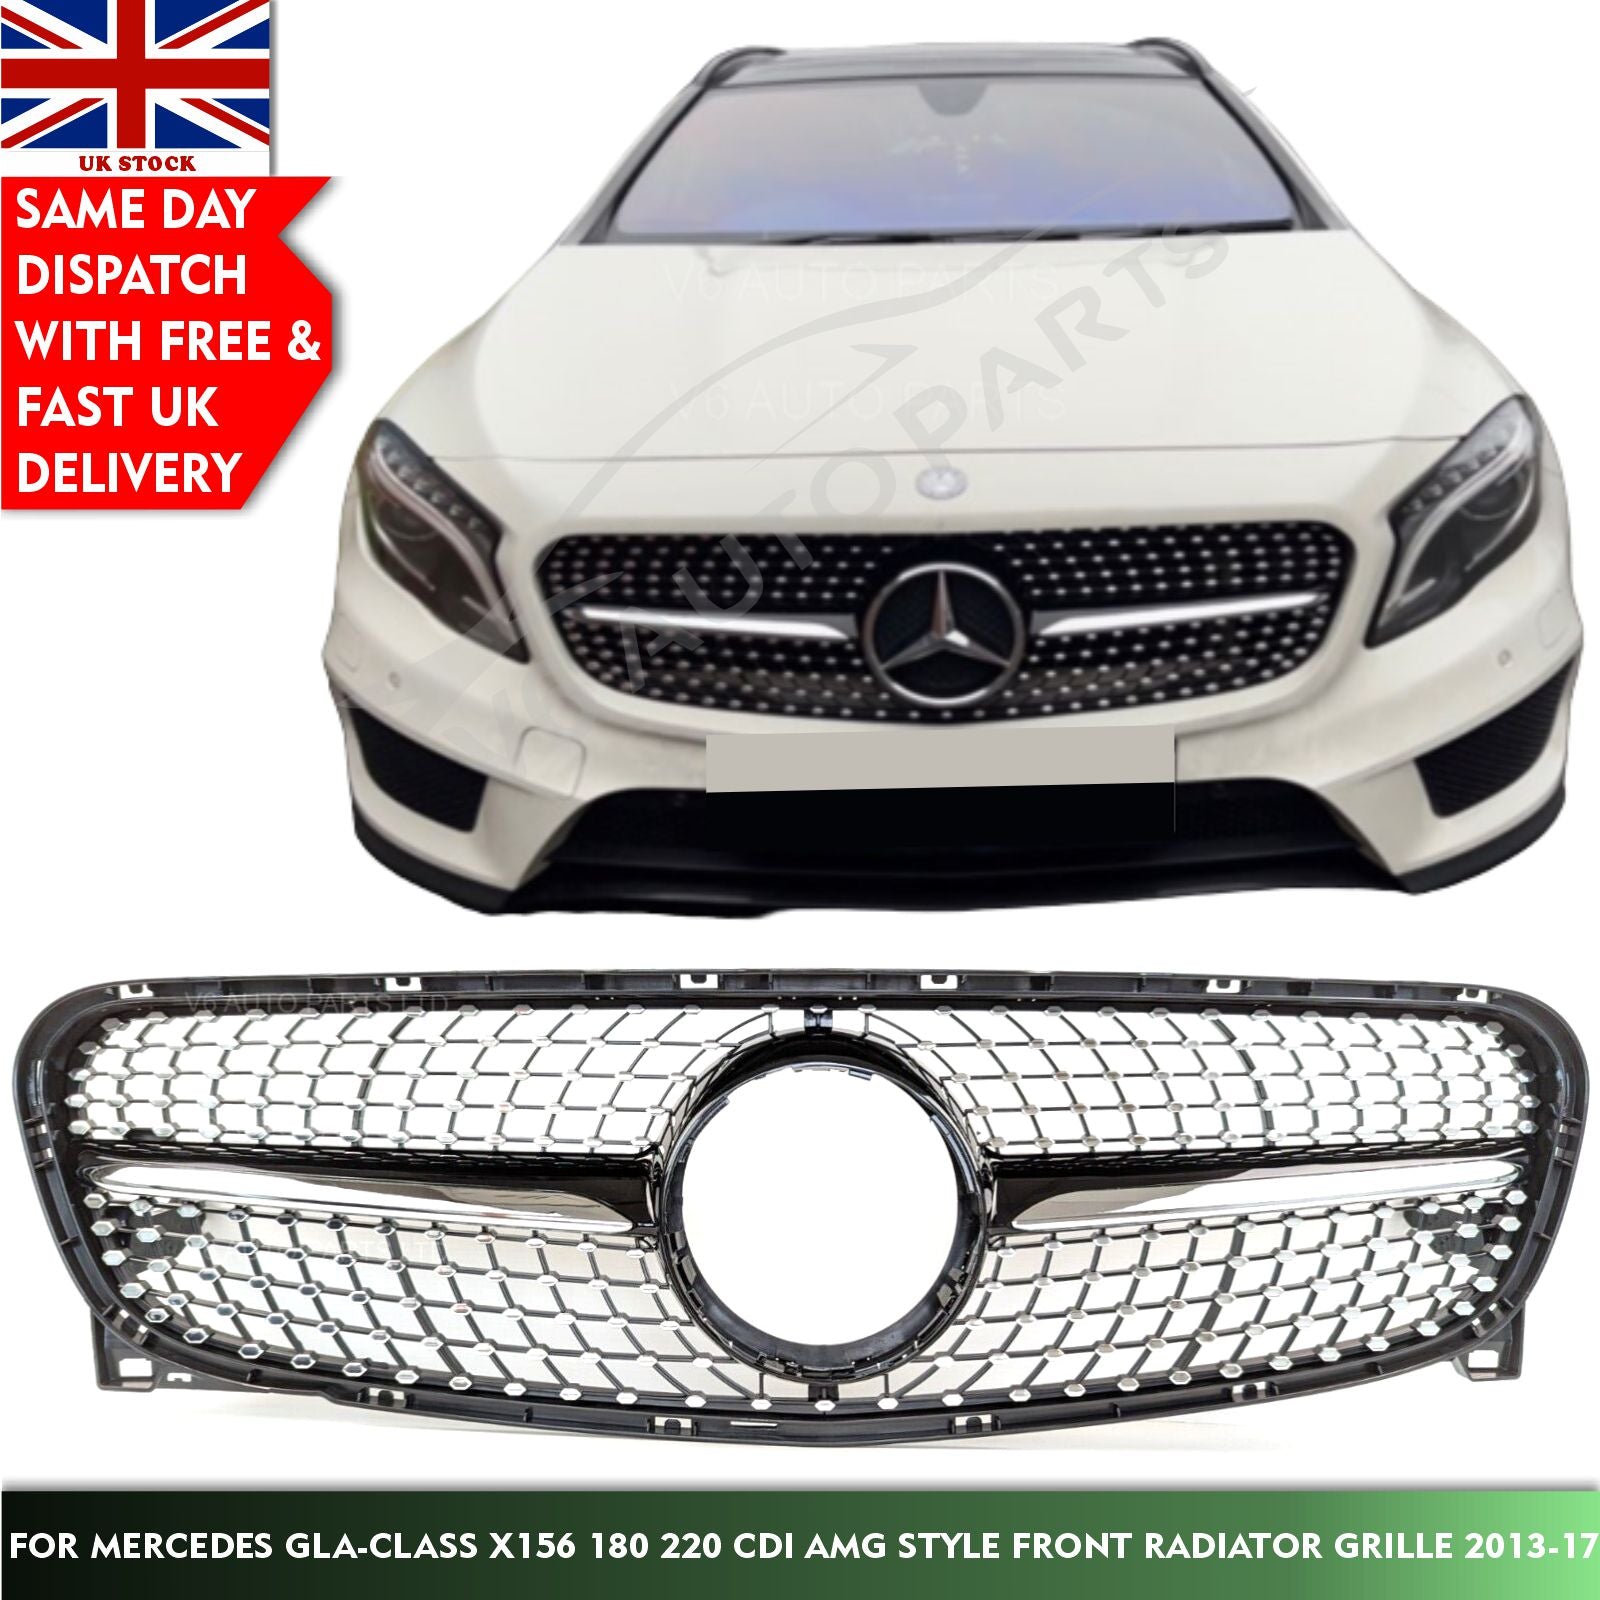 For Mercedes GLA-Class X156 AMG 45 Front Bumper Diamond Grille 2013-17 Pre-Facelift